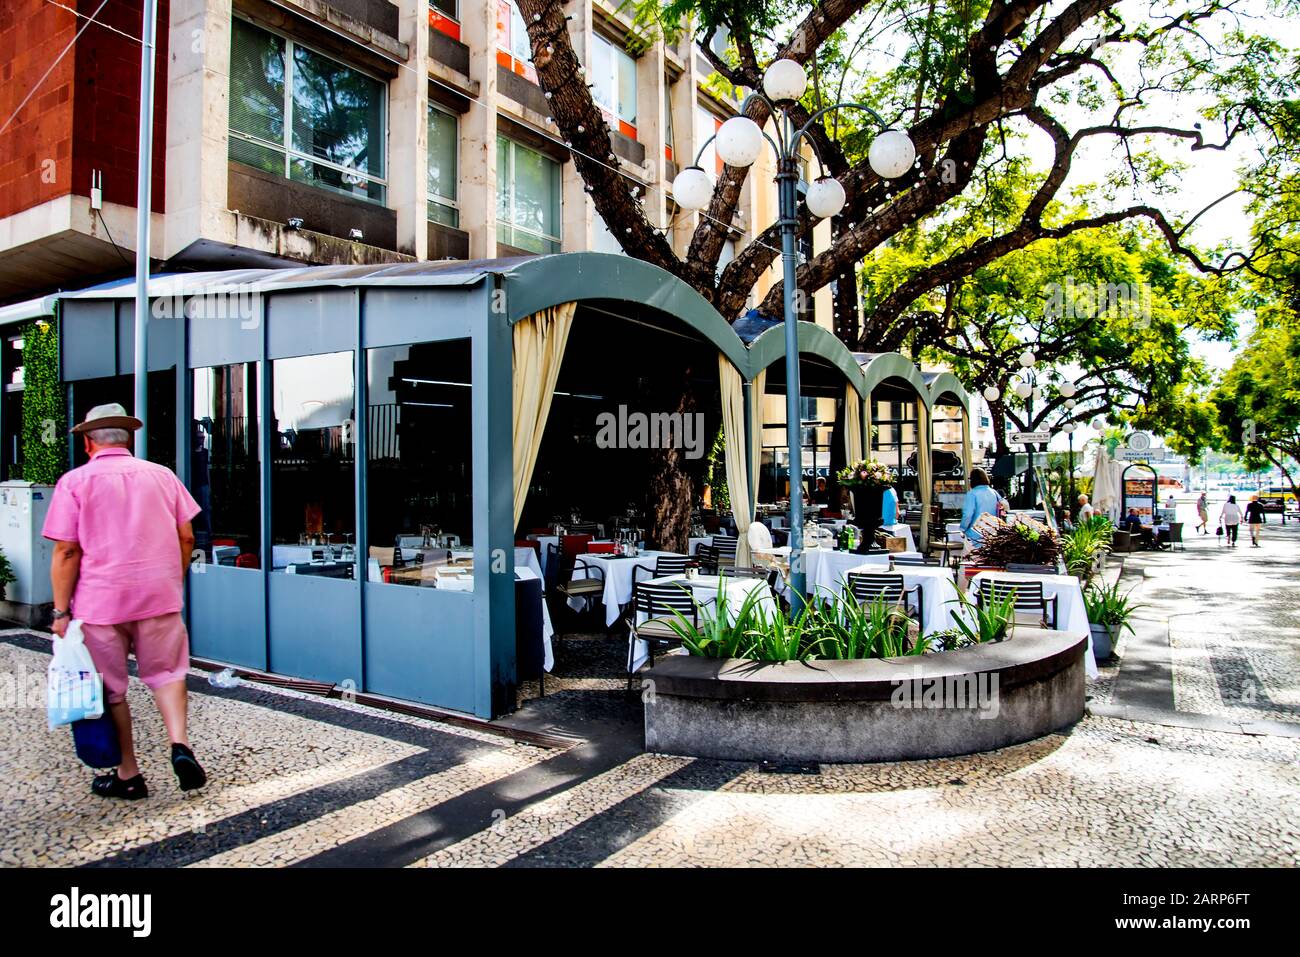 The main restaurant and cafe area in Funchal on the island of Madeira are filledwith restaurants serving food from many different nationalities Stock Photo